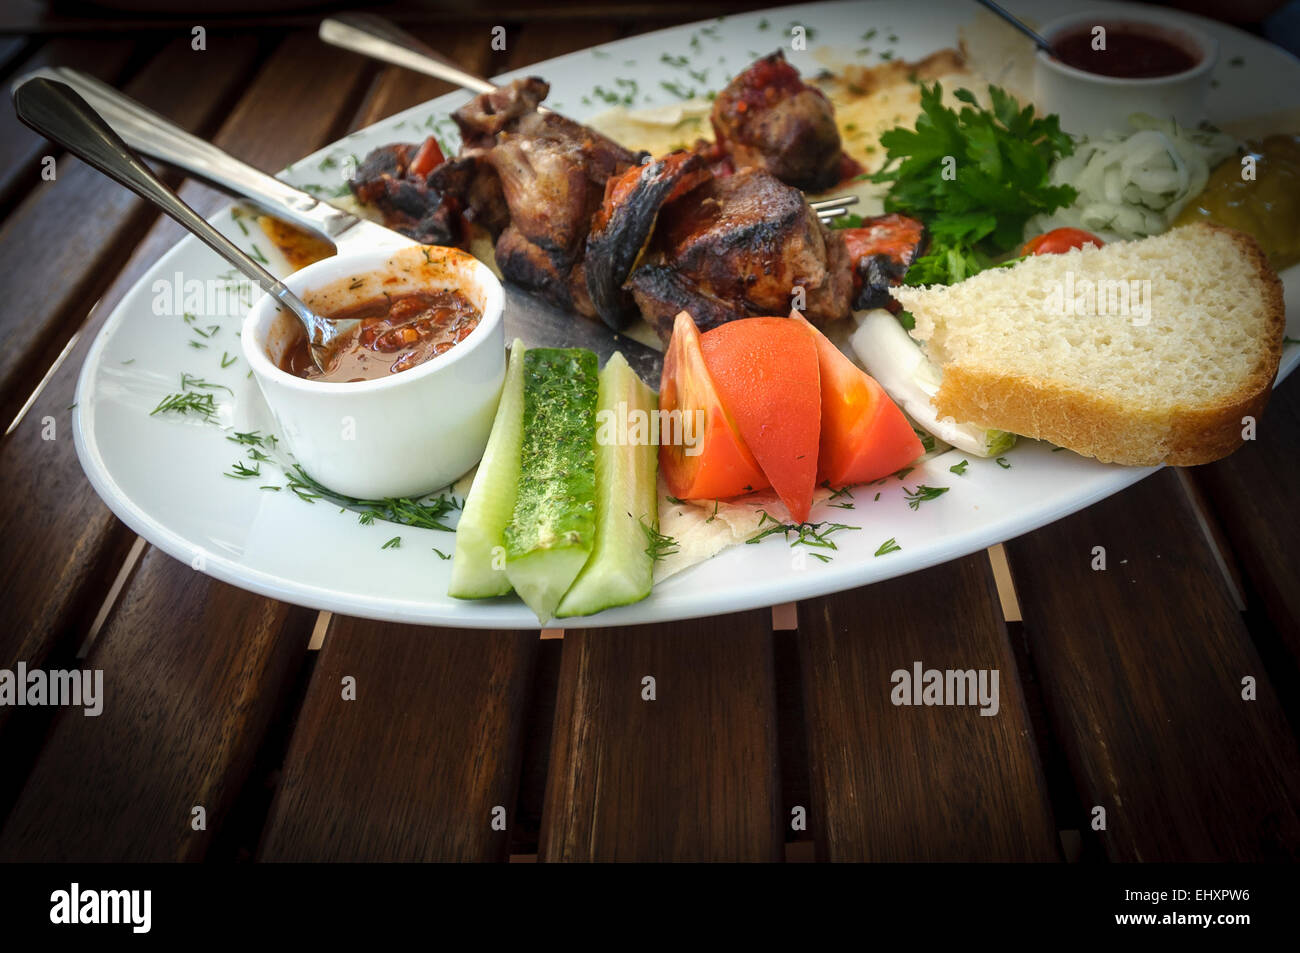 Nice and tasty dish of roasted meat with vegetables and souces Stock Photo